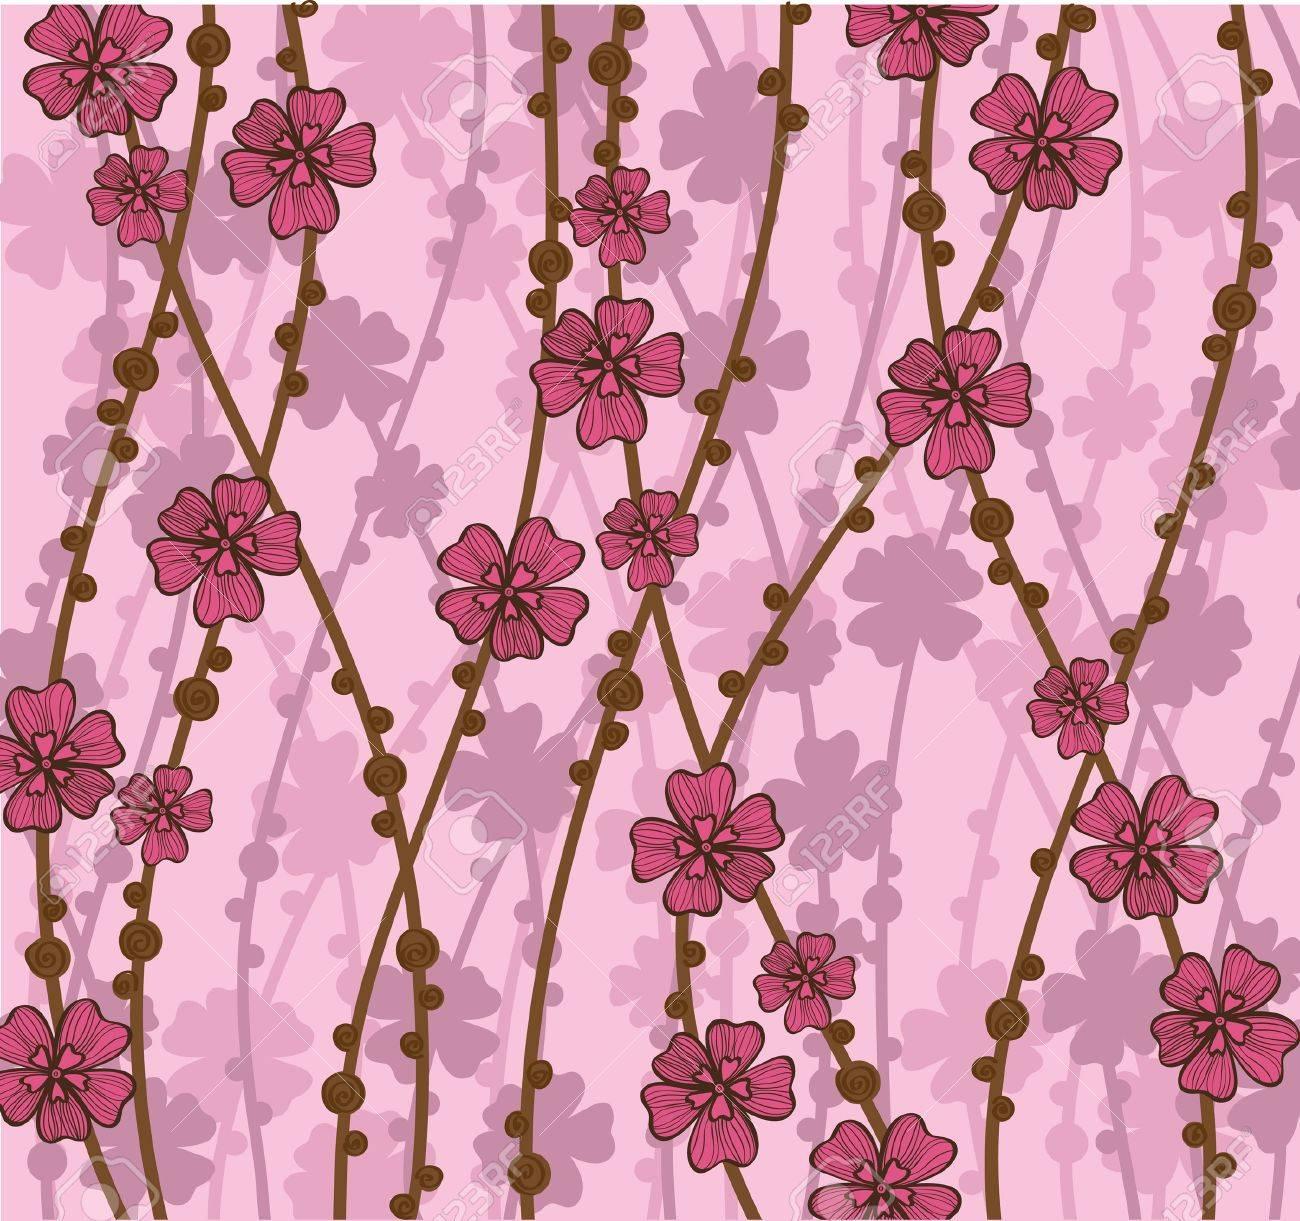 Pink Wallpaper With Beautiful Abstract Japanese Flowers Royalty